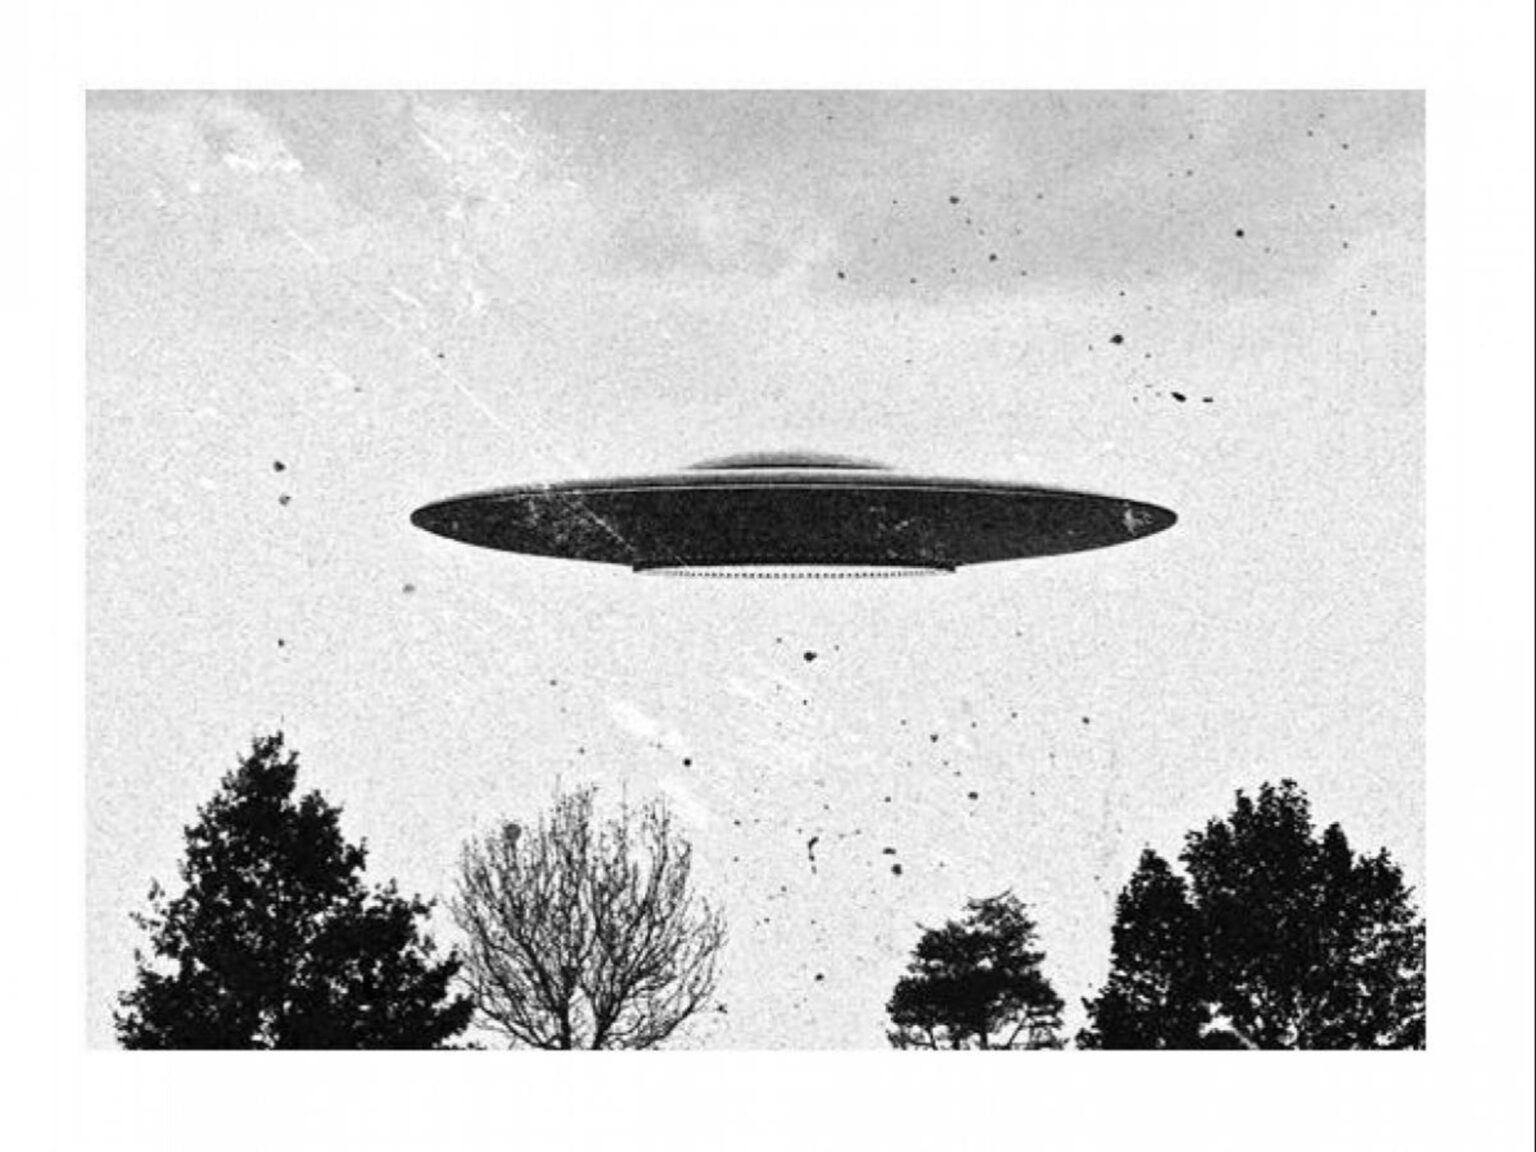 Is this the UFO test we have all been waiting for? Let's dive into this cosmic conundrum and the legislative steps being taken to crack it.